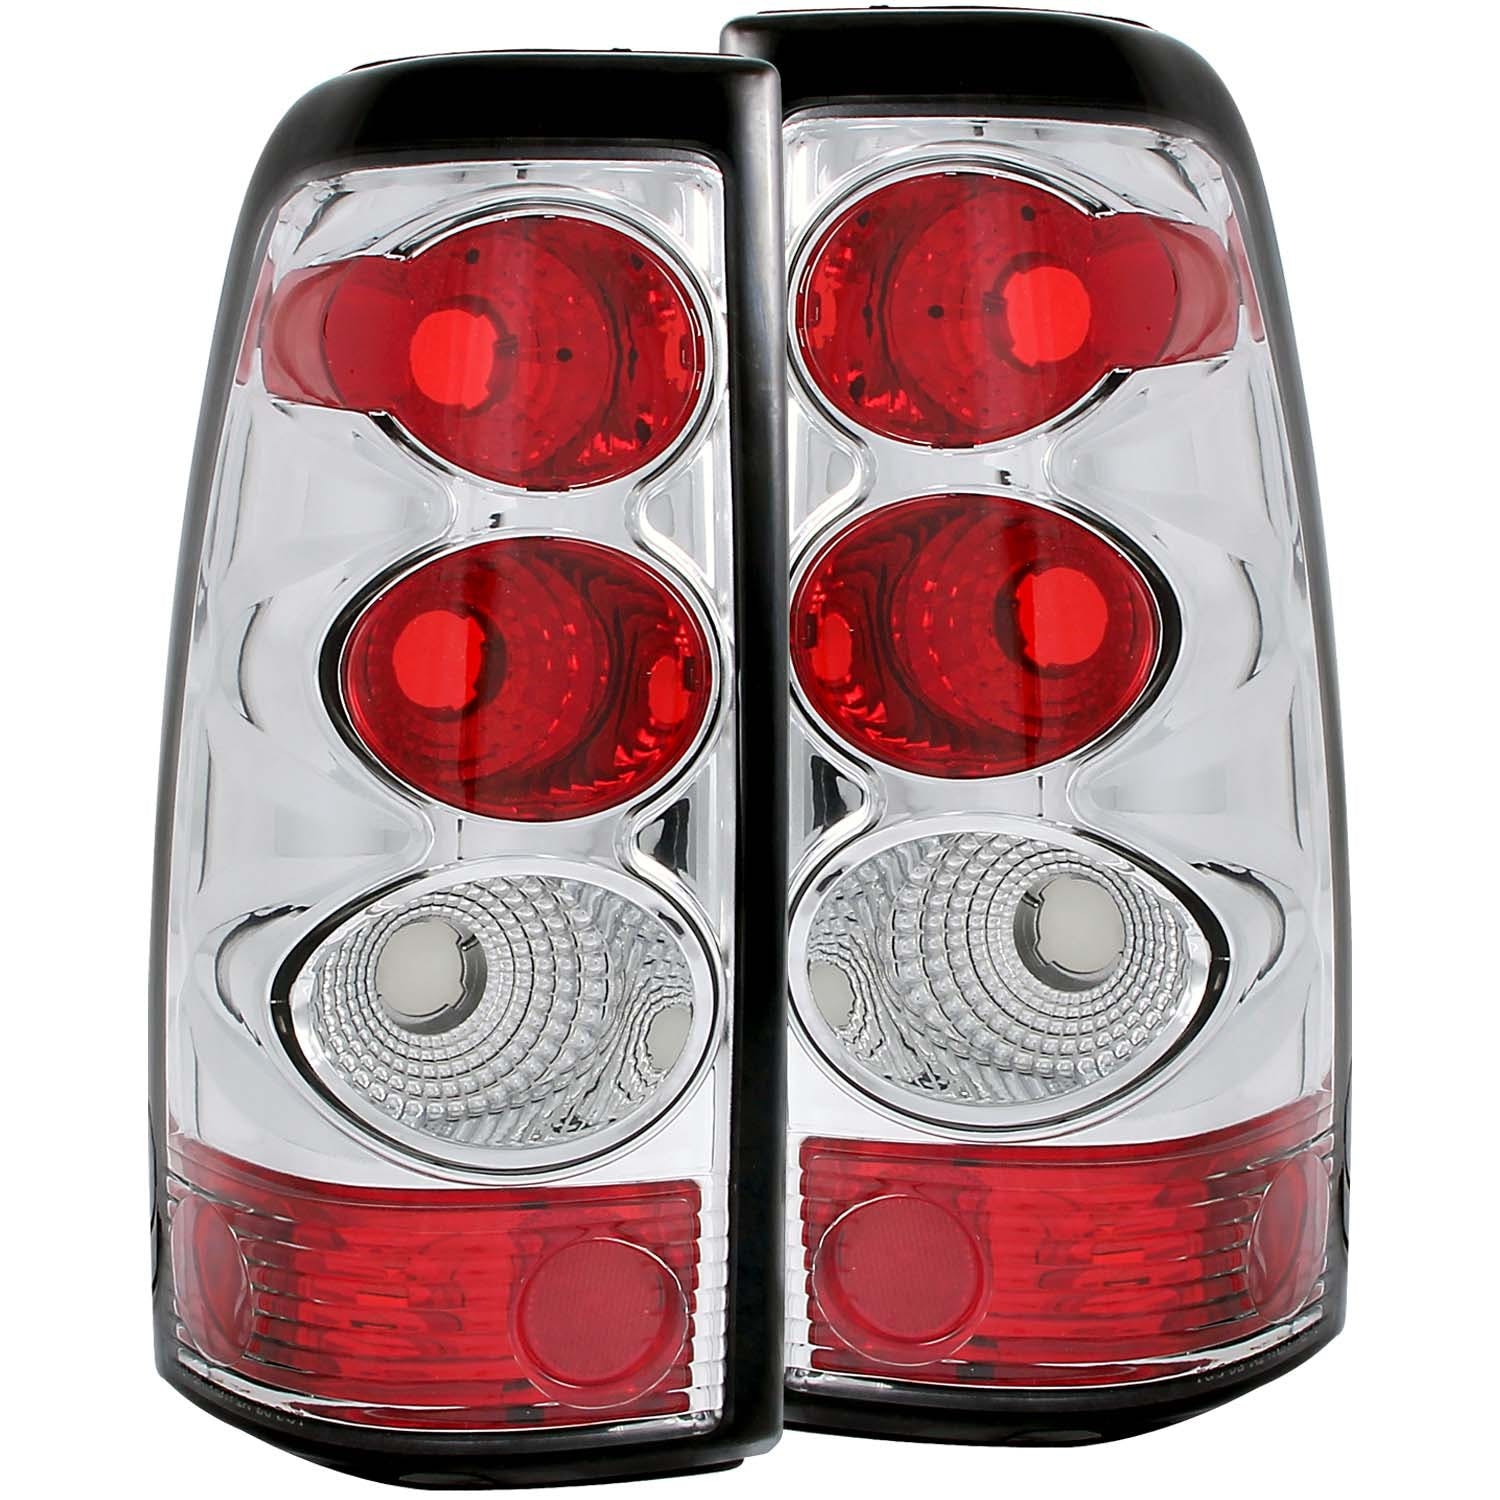 AnzoUSA 211020 Taillights Chrome